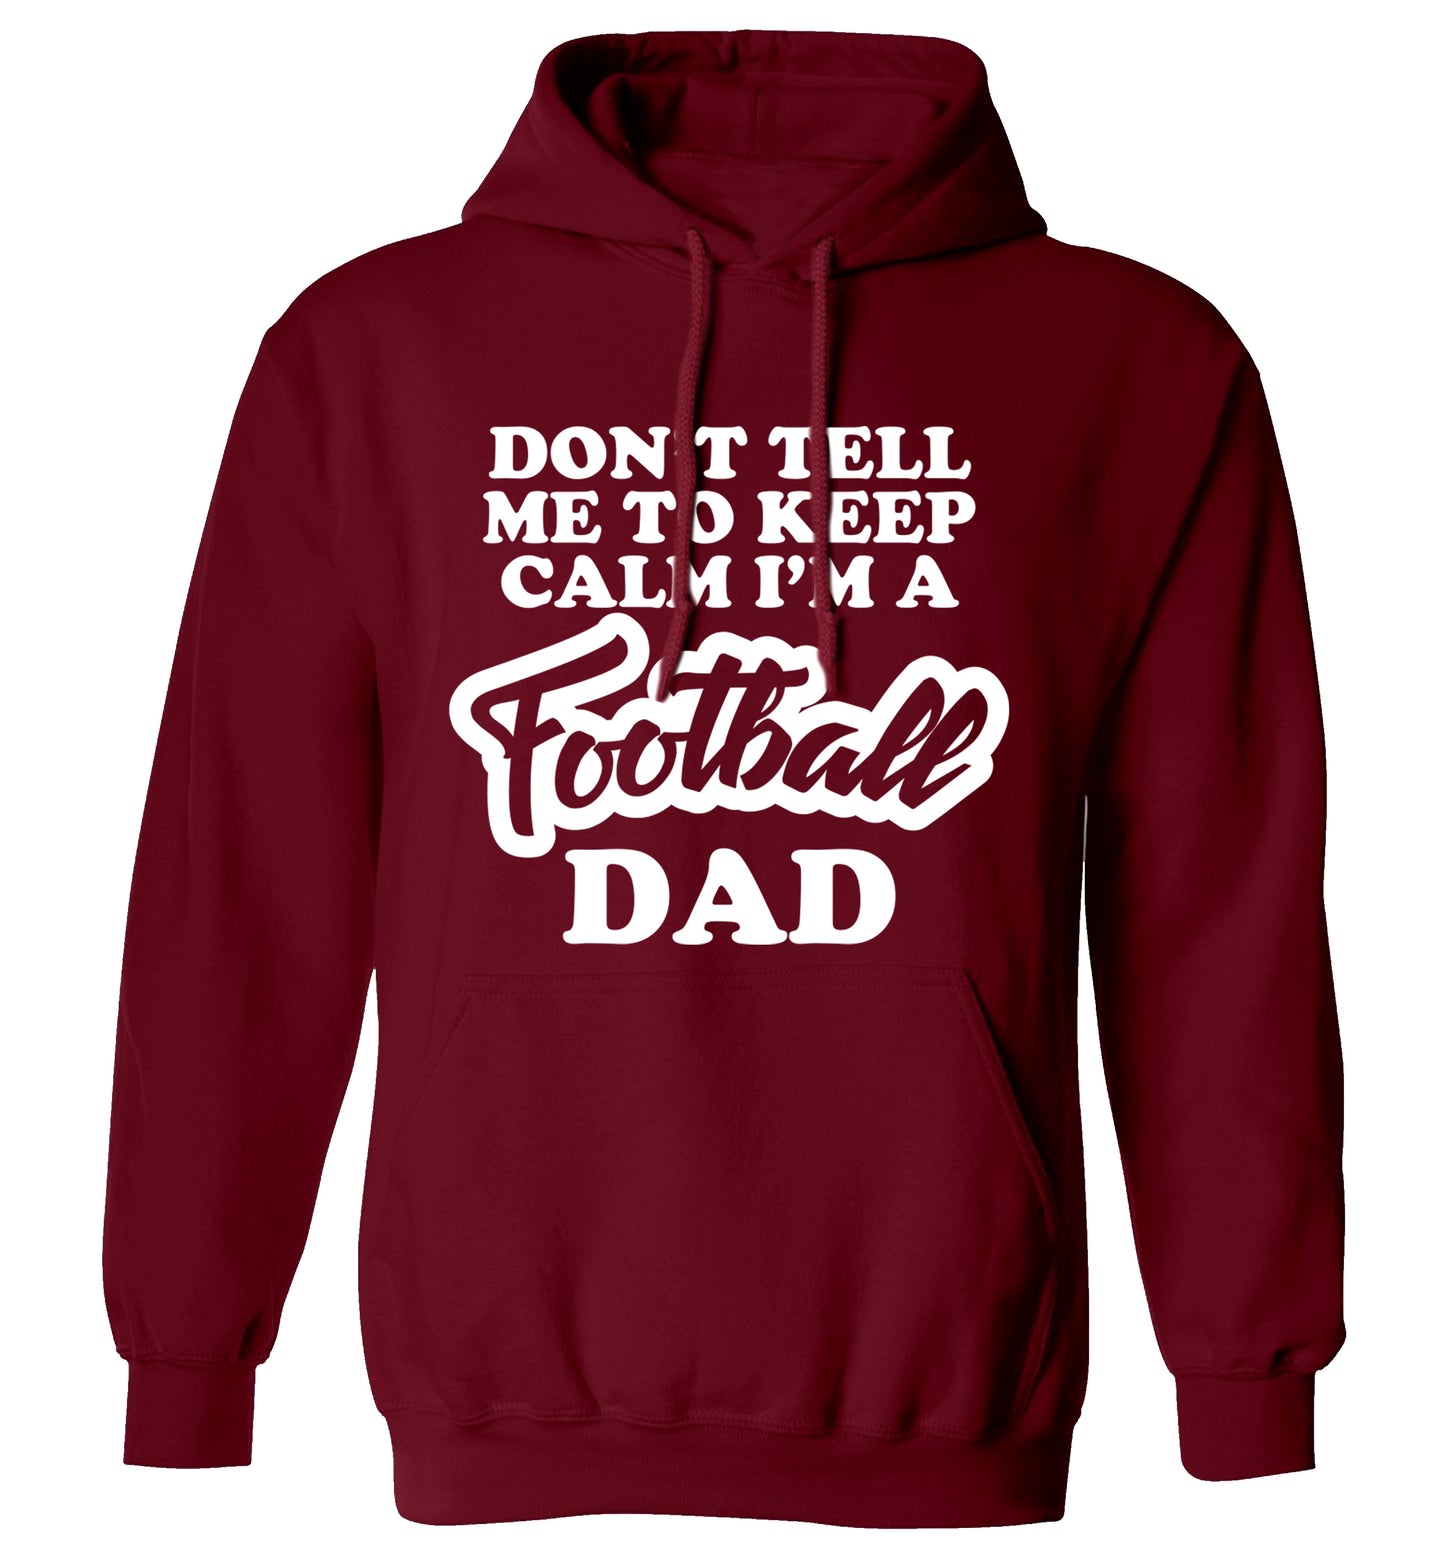 Don't tell me to keep calm I'm a football dad adults unisexmaroon hoodie 2XL